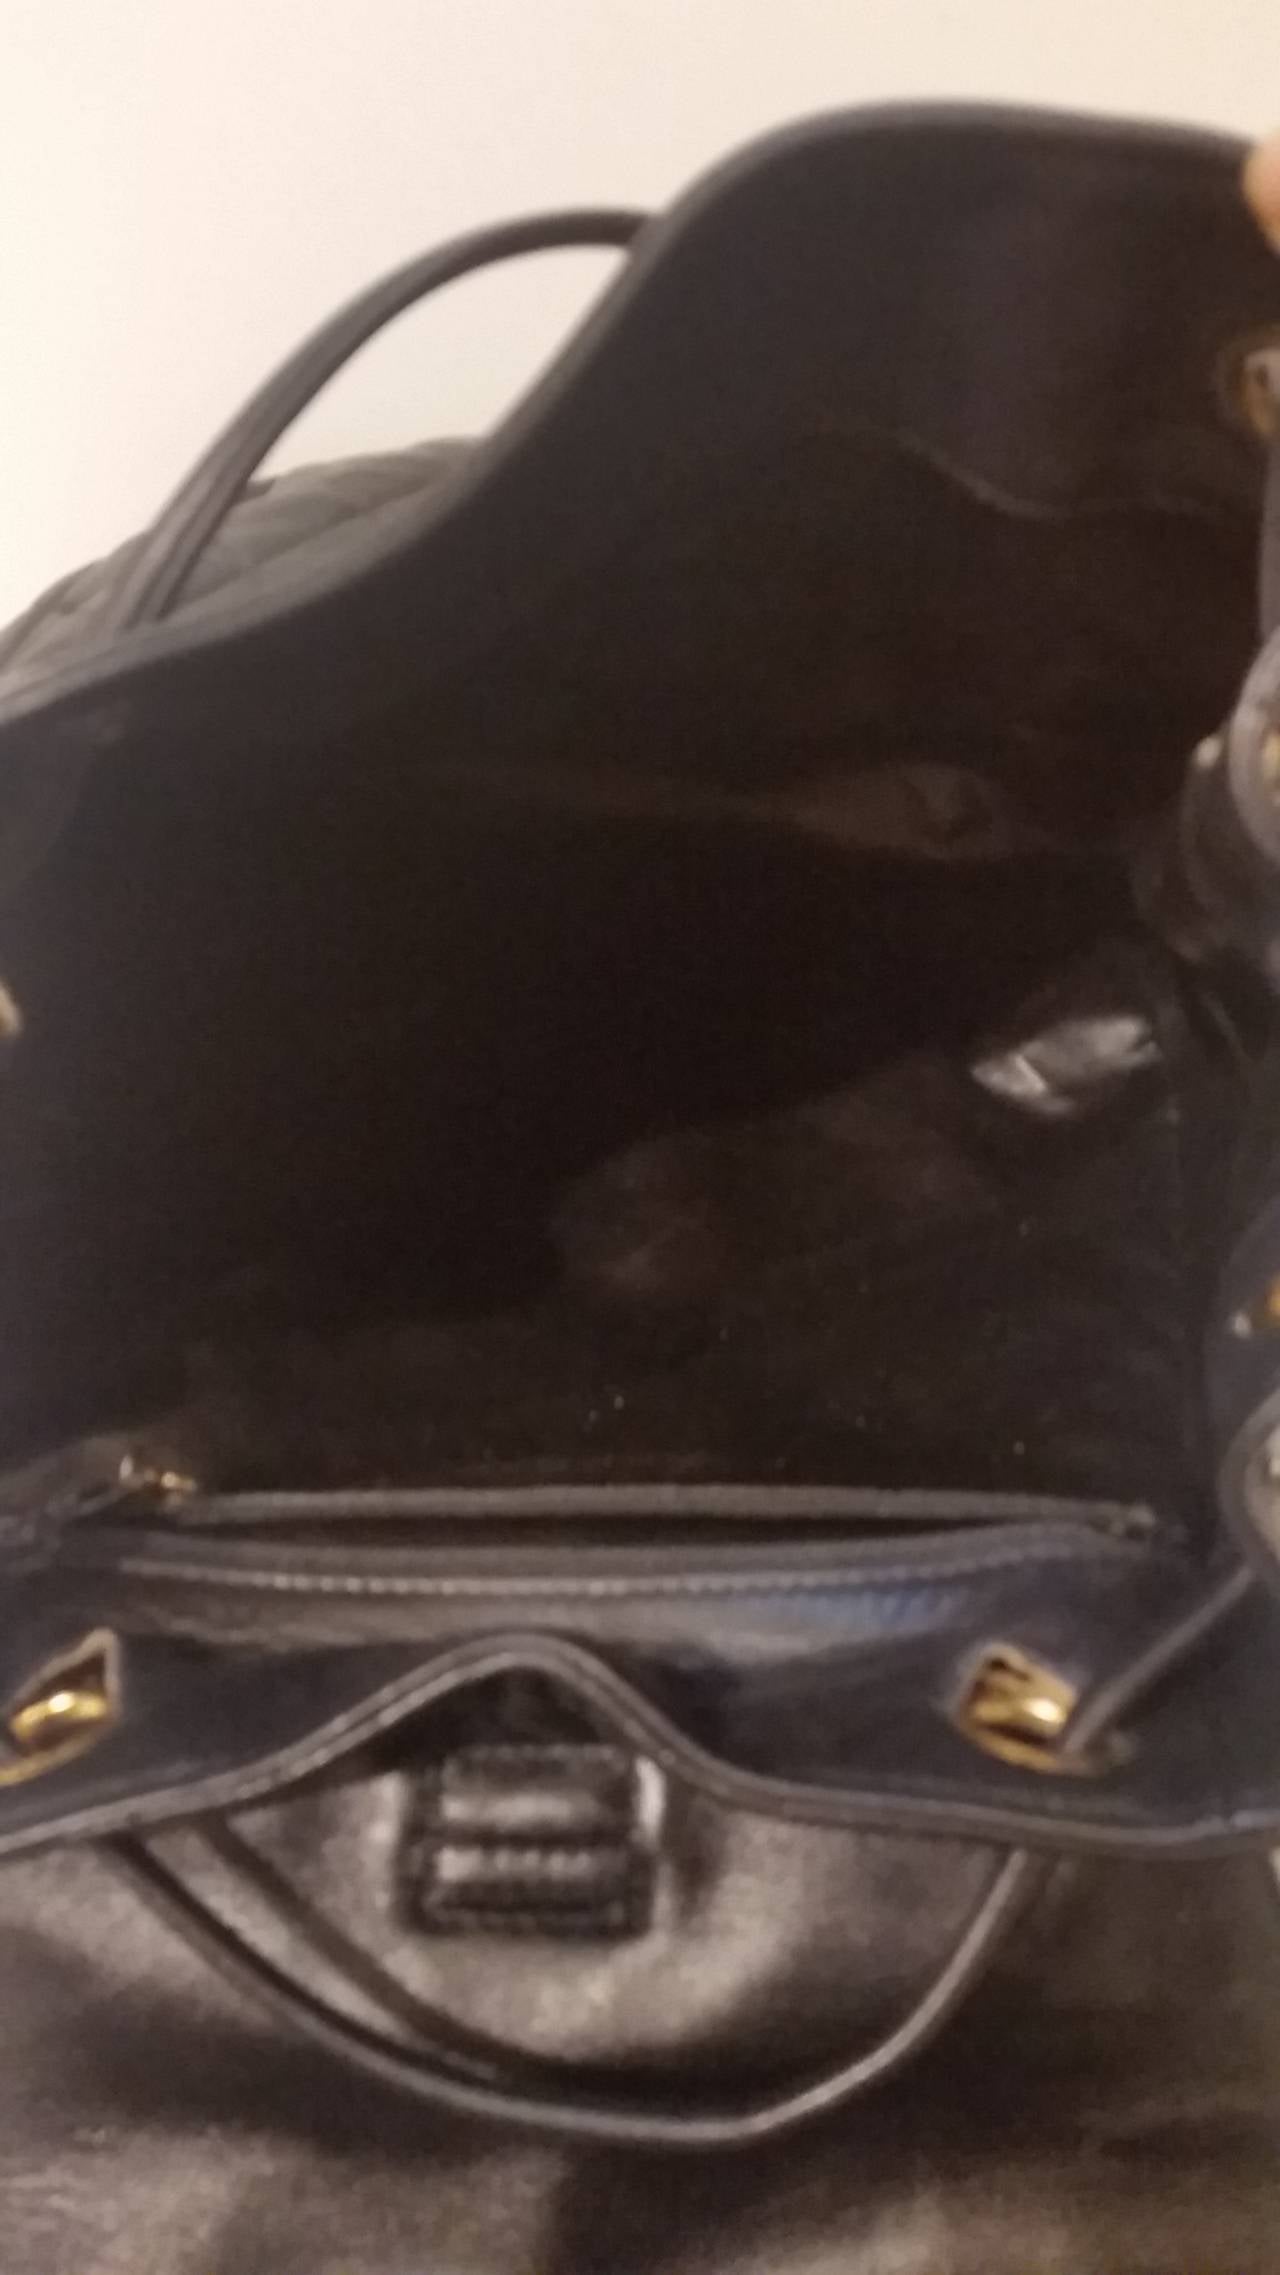 Women's 1980s Chanel black leather backpack